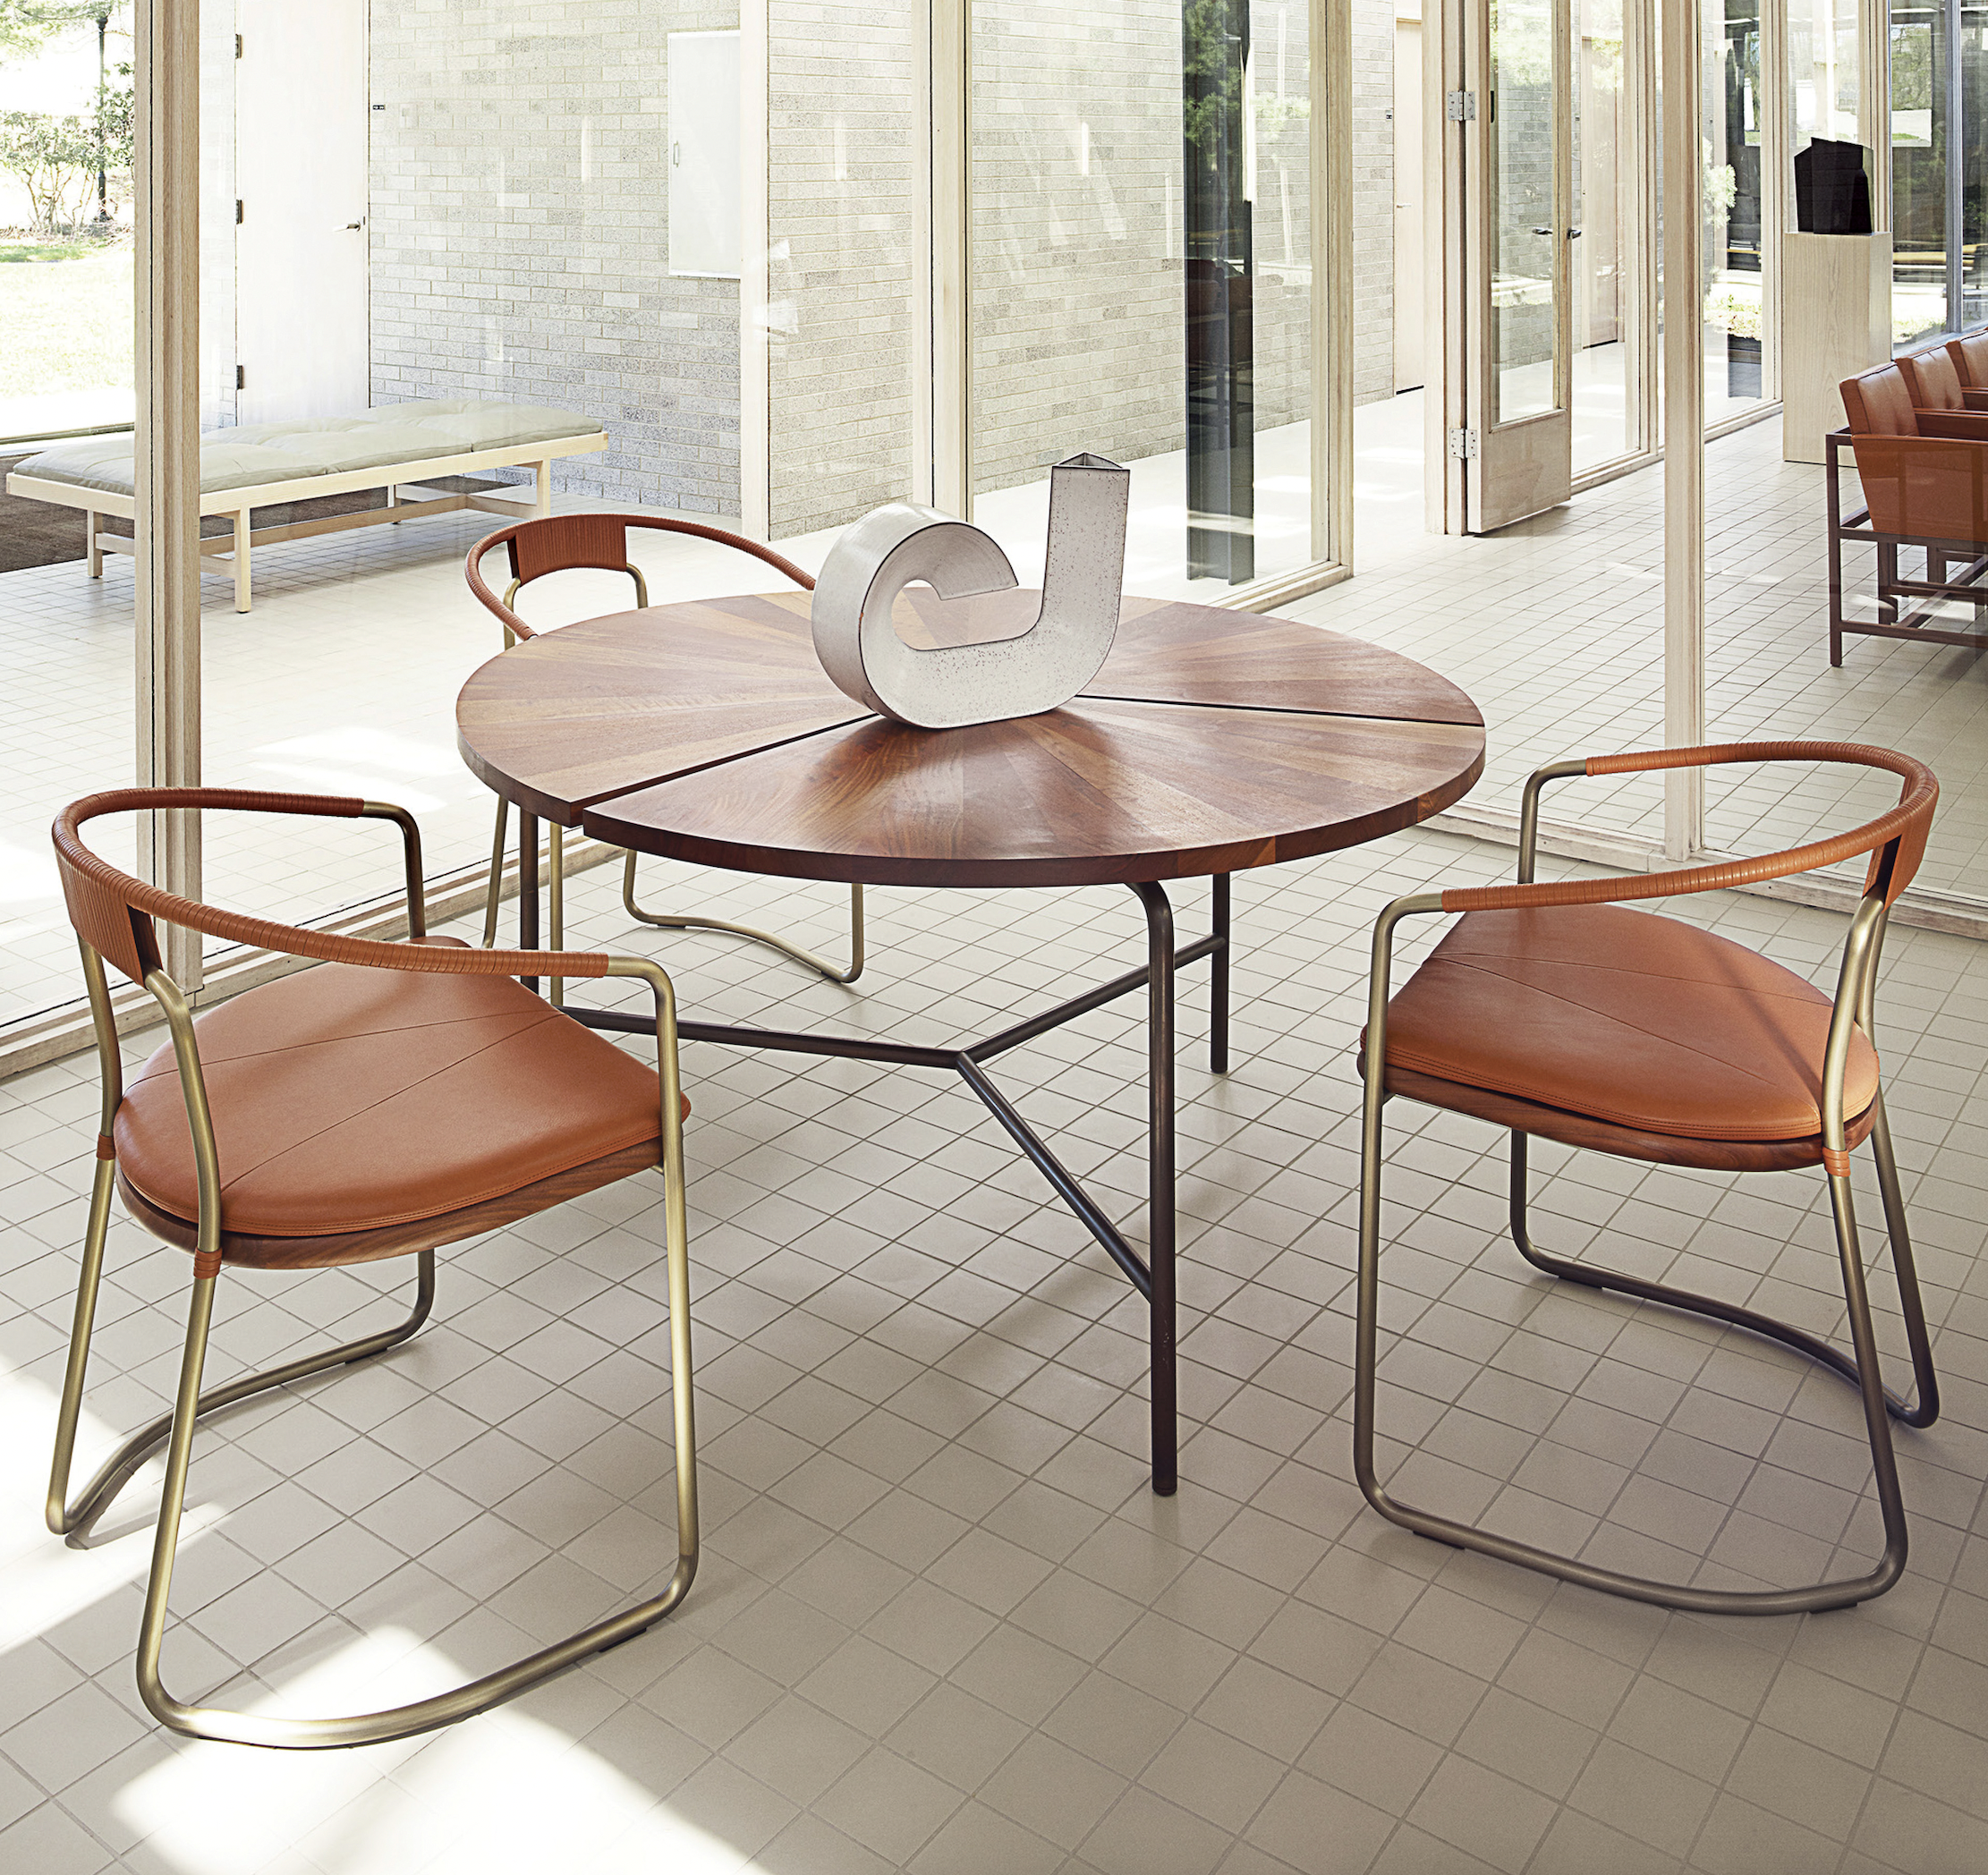 BassamFellows CB-450 Geometric Chairs Walnut and Bronze and CB-35 Circular Dining Table in solid Walnut and Oxidized Brass